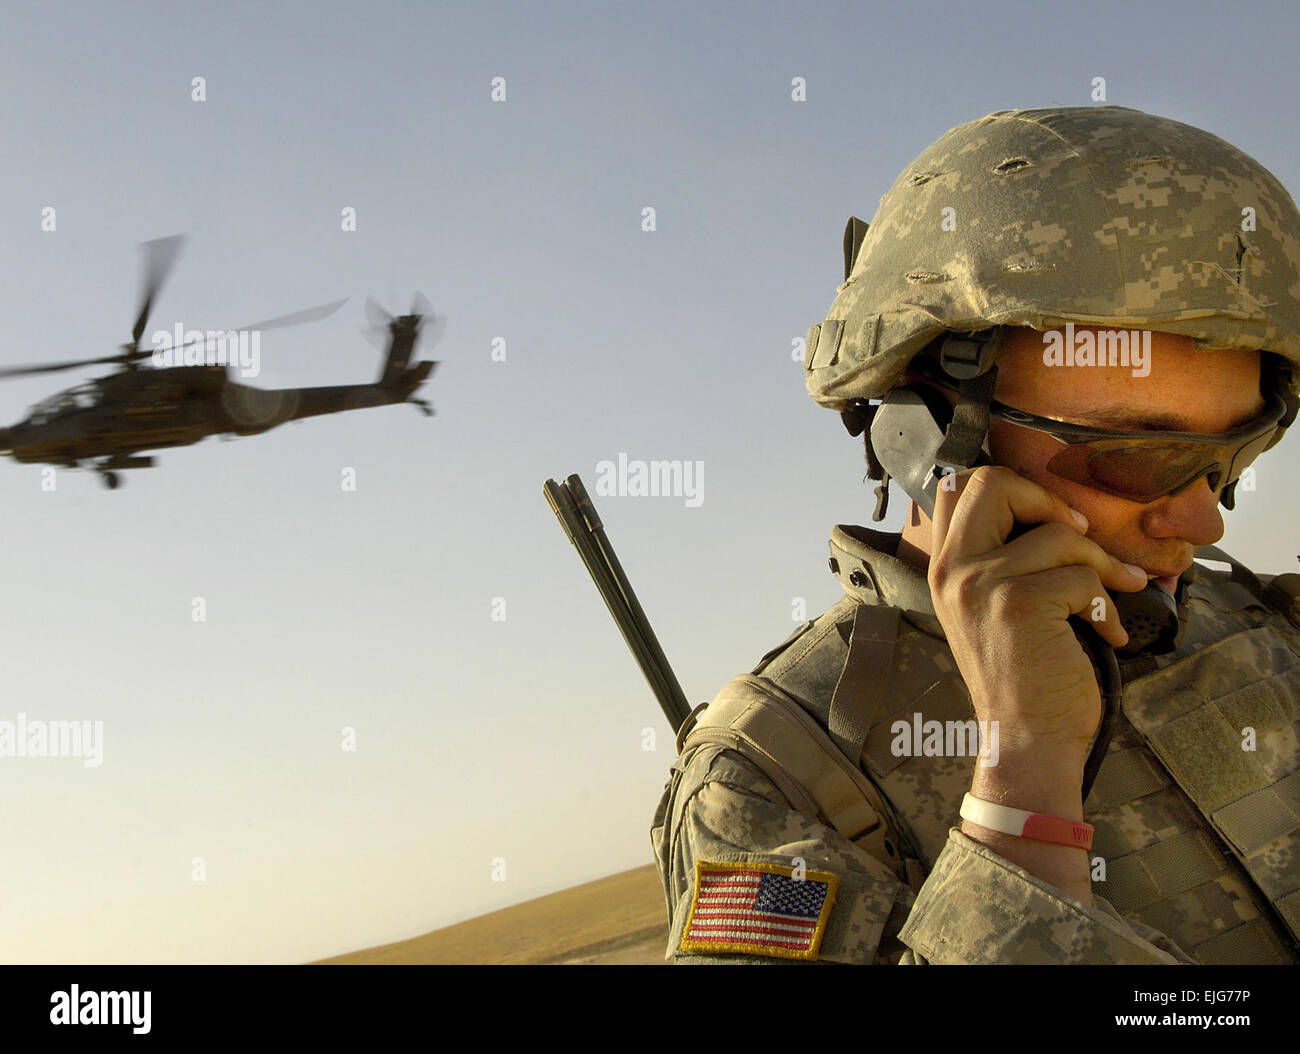 2nd Lt. Zack Zilai, B Company, 4-23 Infantry Regiment, 172nd Stryker Brigade Combat Team, maintains radio contact with Apache helicopters during an aerial traffic control point mission near Tall Afar, Iraq, on June 5, 2006.  Staff Sgt. Jacob N. Bailey.      . Stock Photo